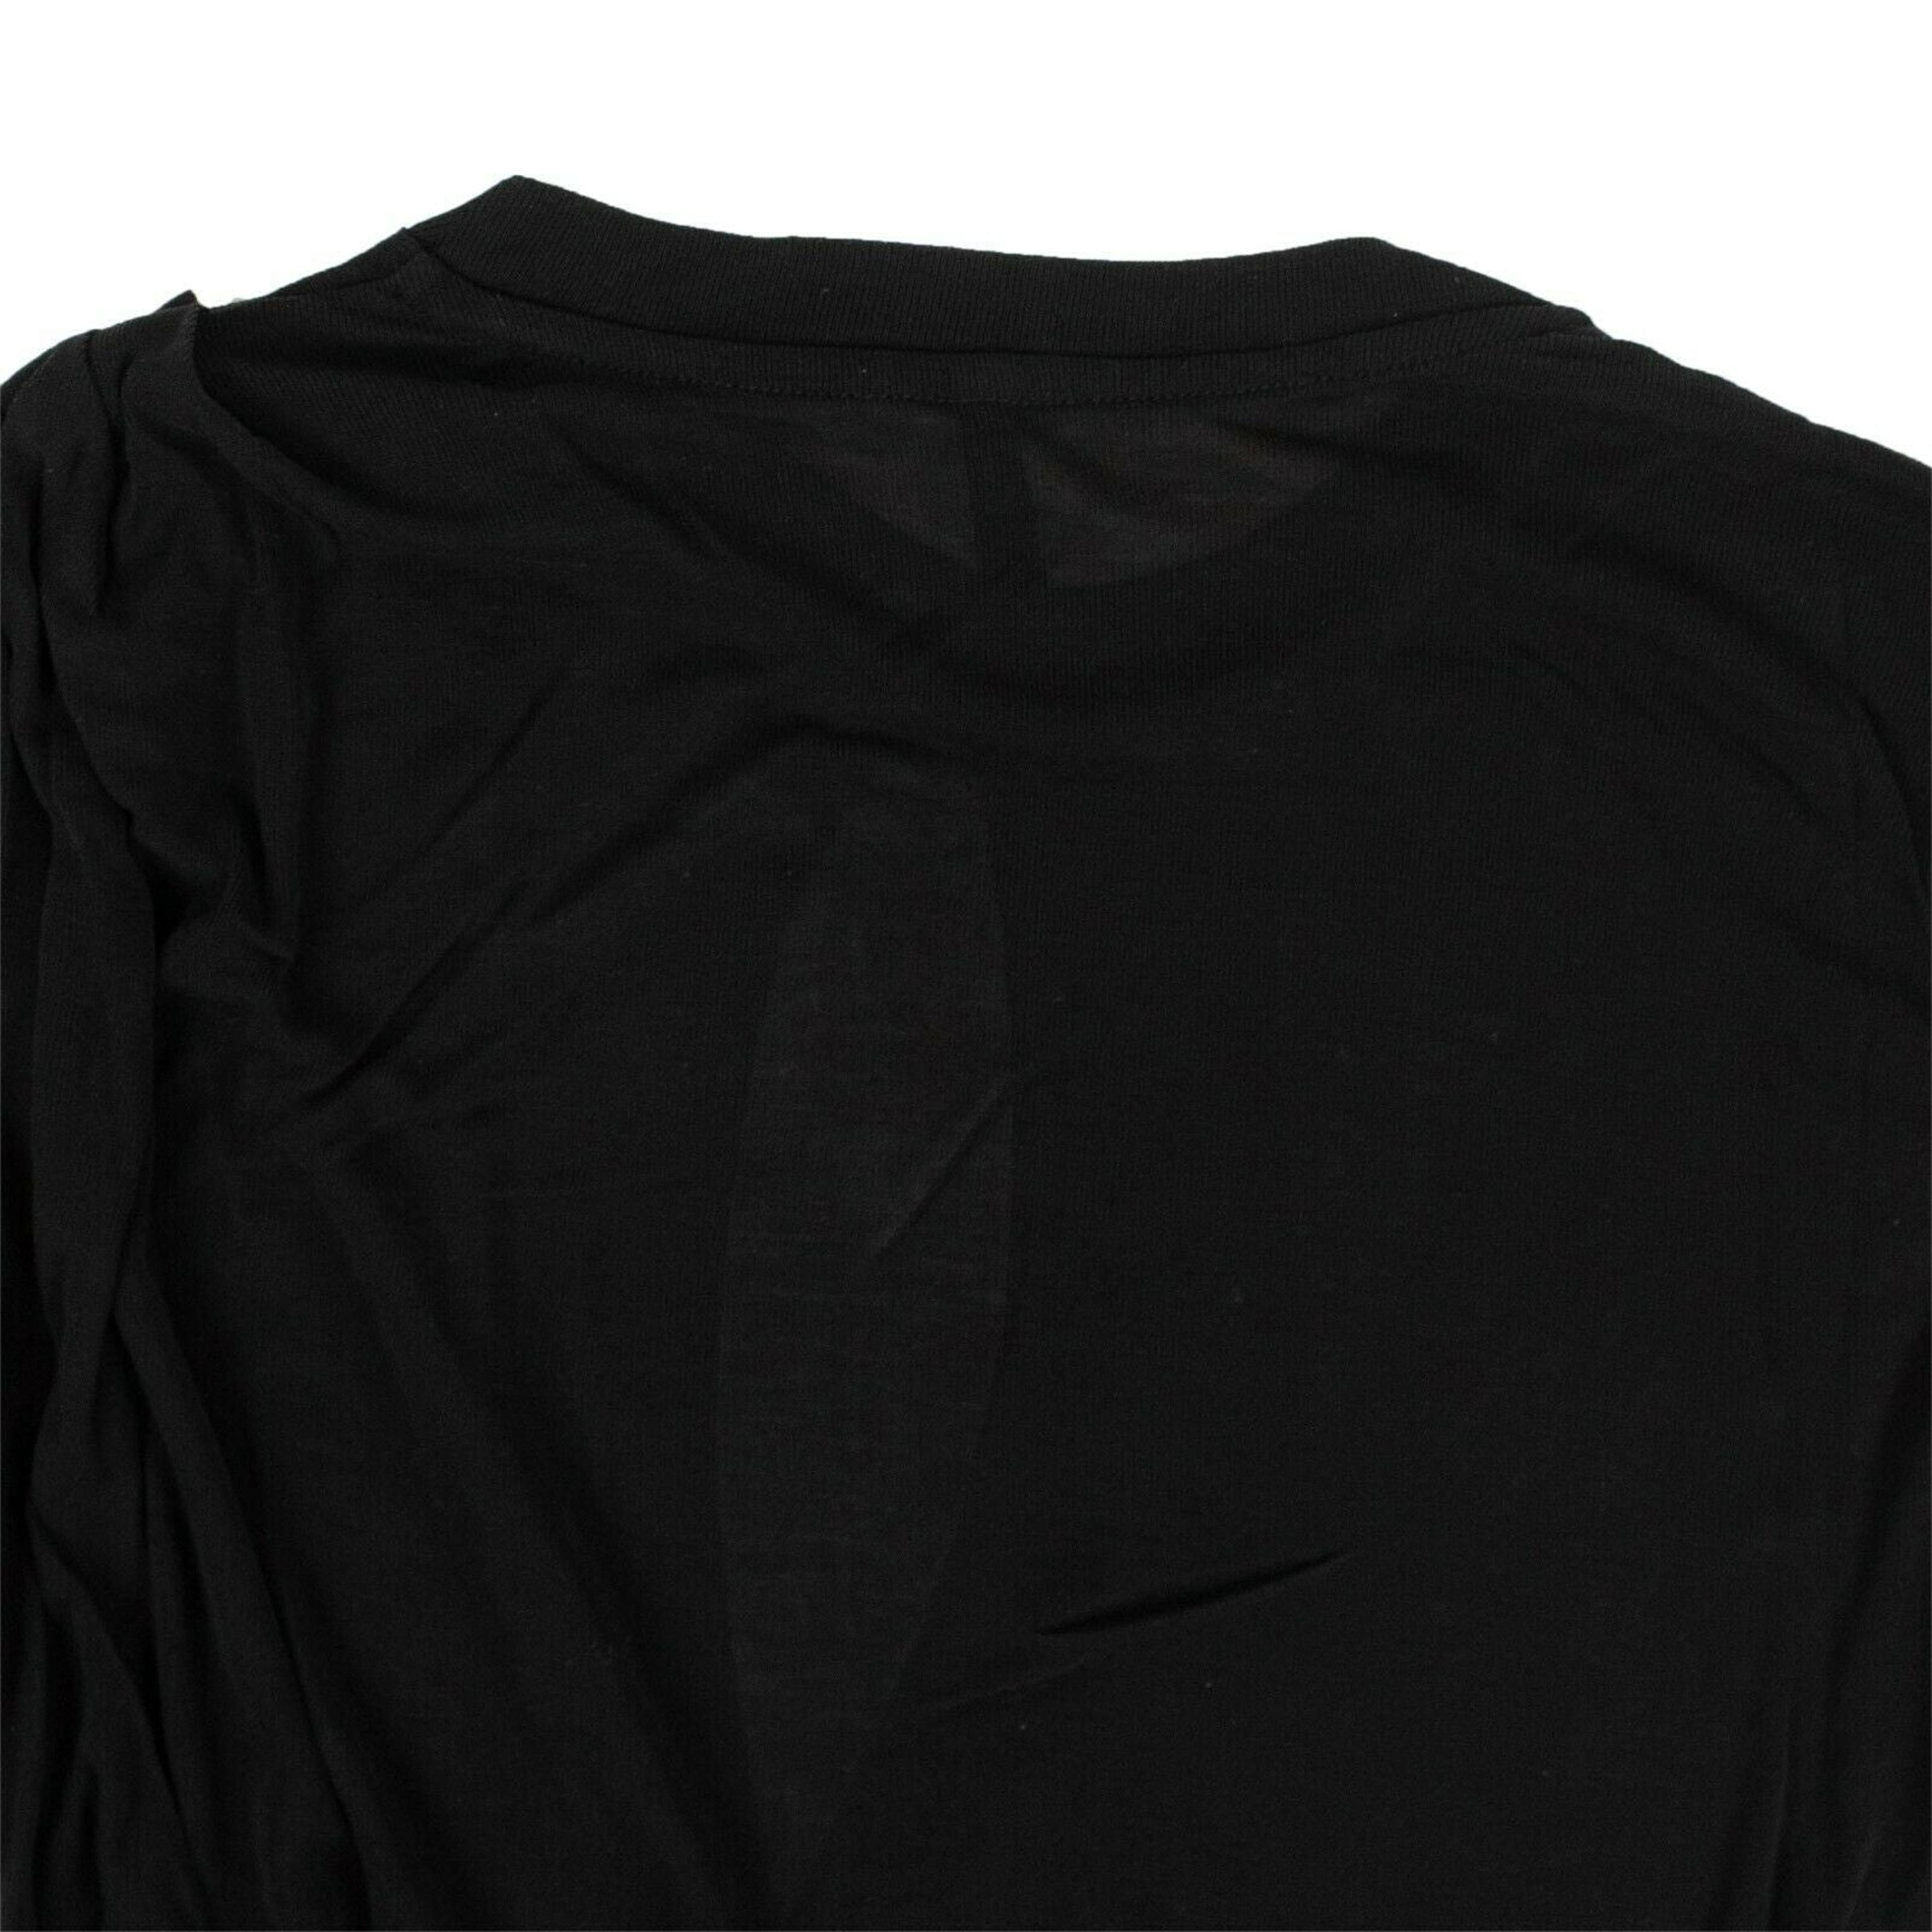 Alternate View 3 of Unravel Project Silk Draped T-Shirt - Black